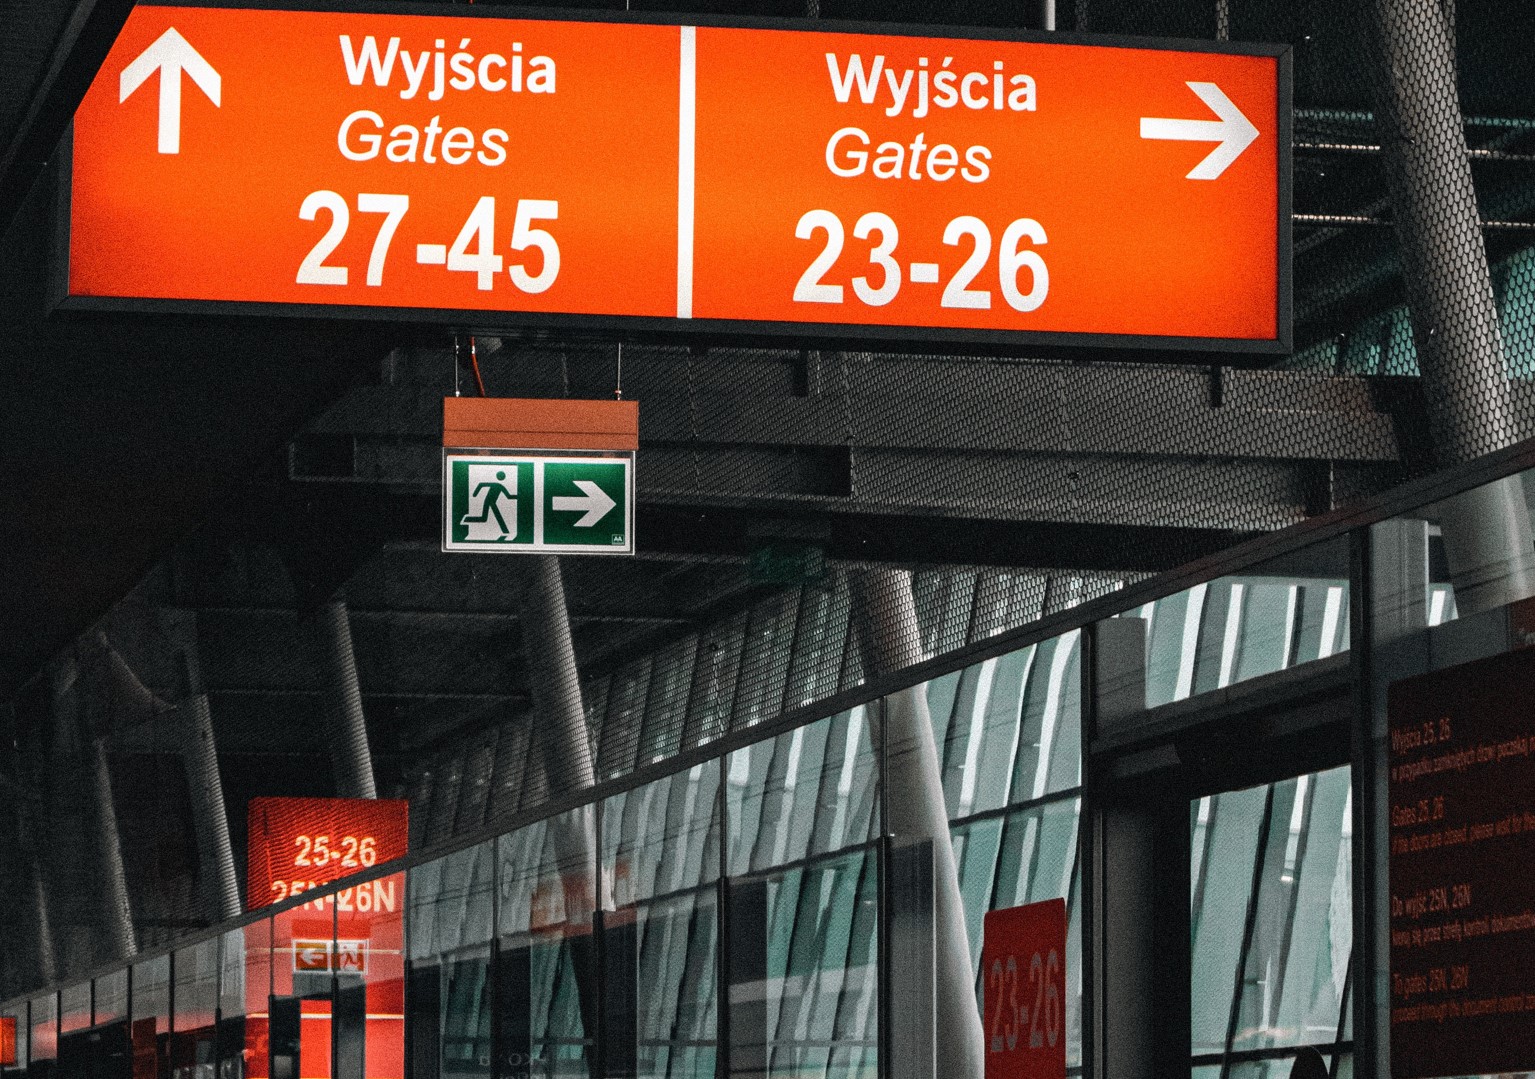 Warsaw aiport